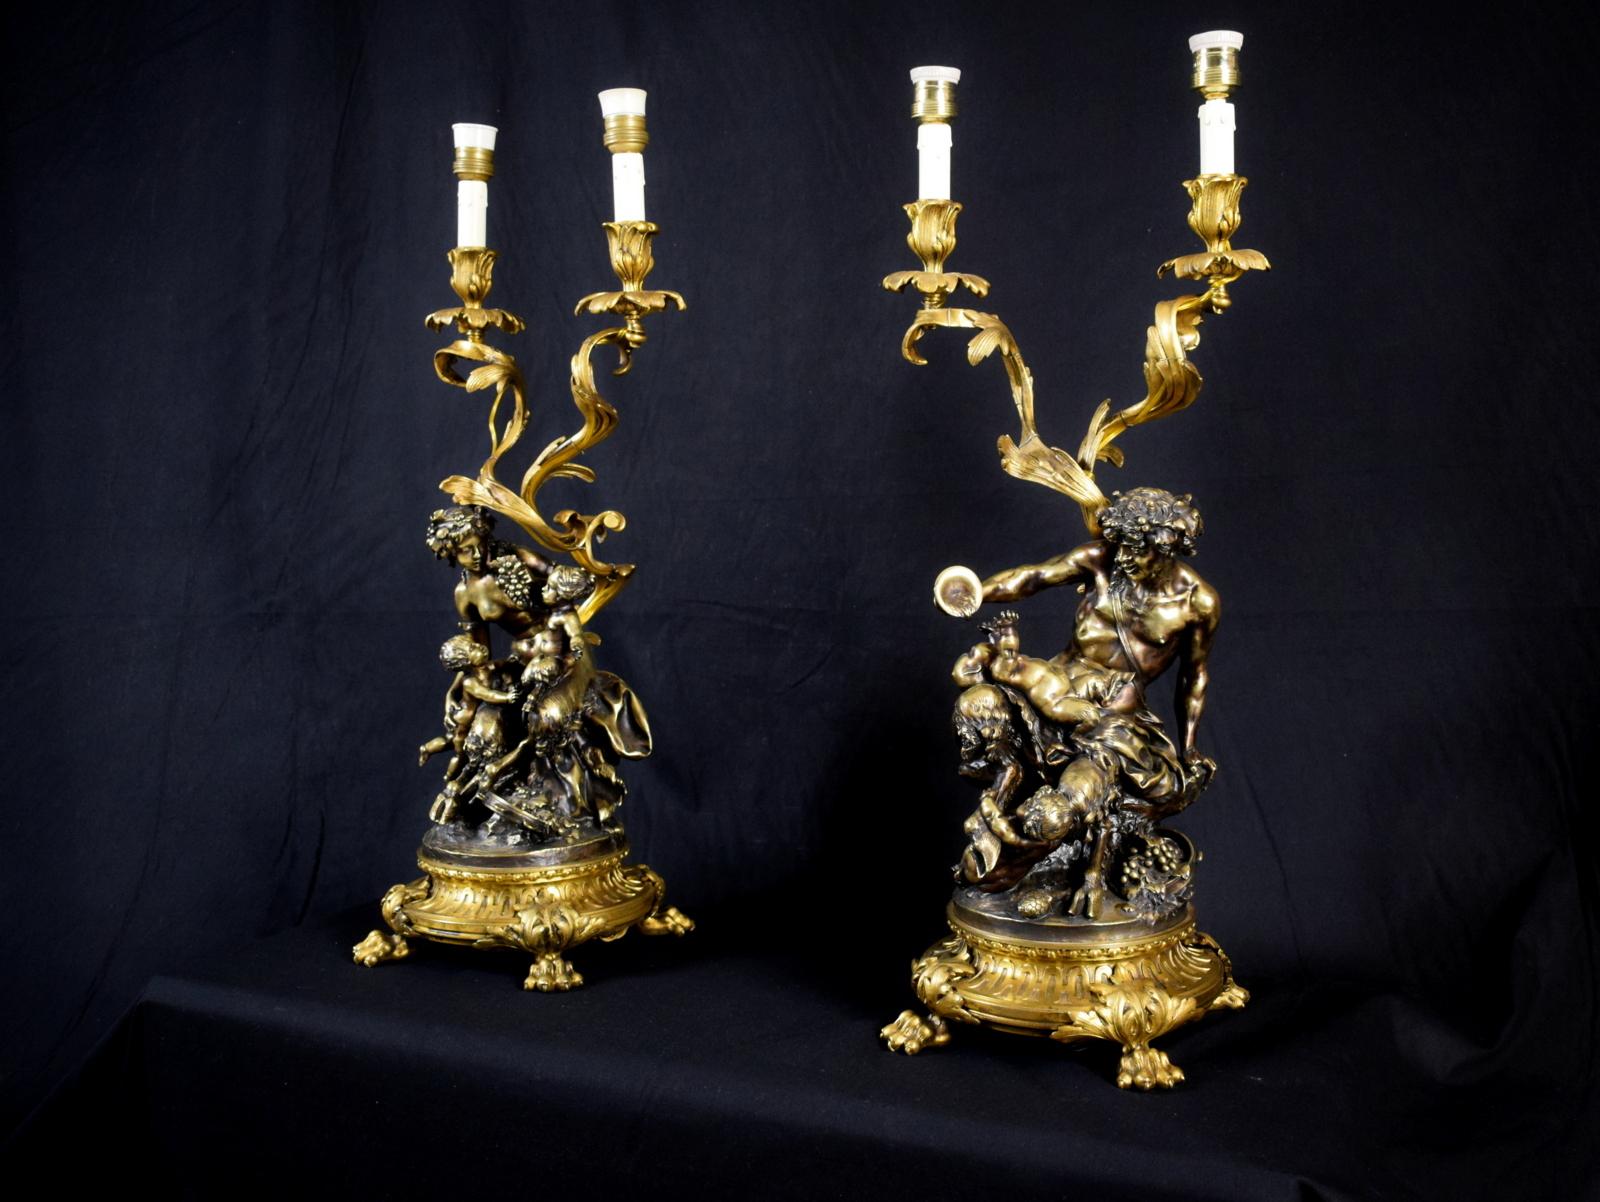 Napoleon III 19th Century Pair of French Bronze Candlesticks Lamps Signed Clodion  For Sale